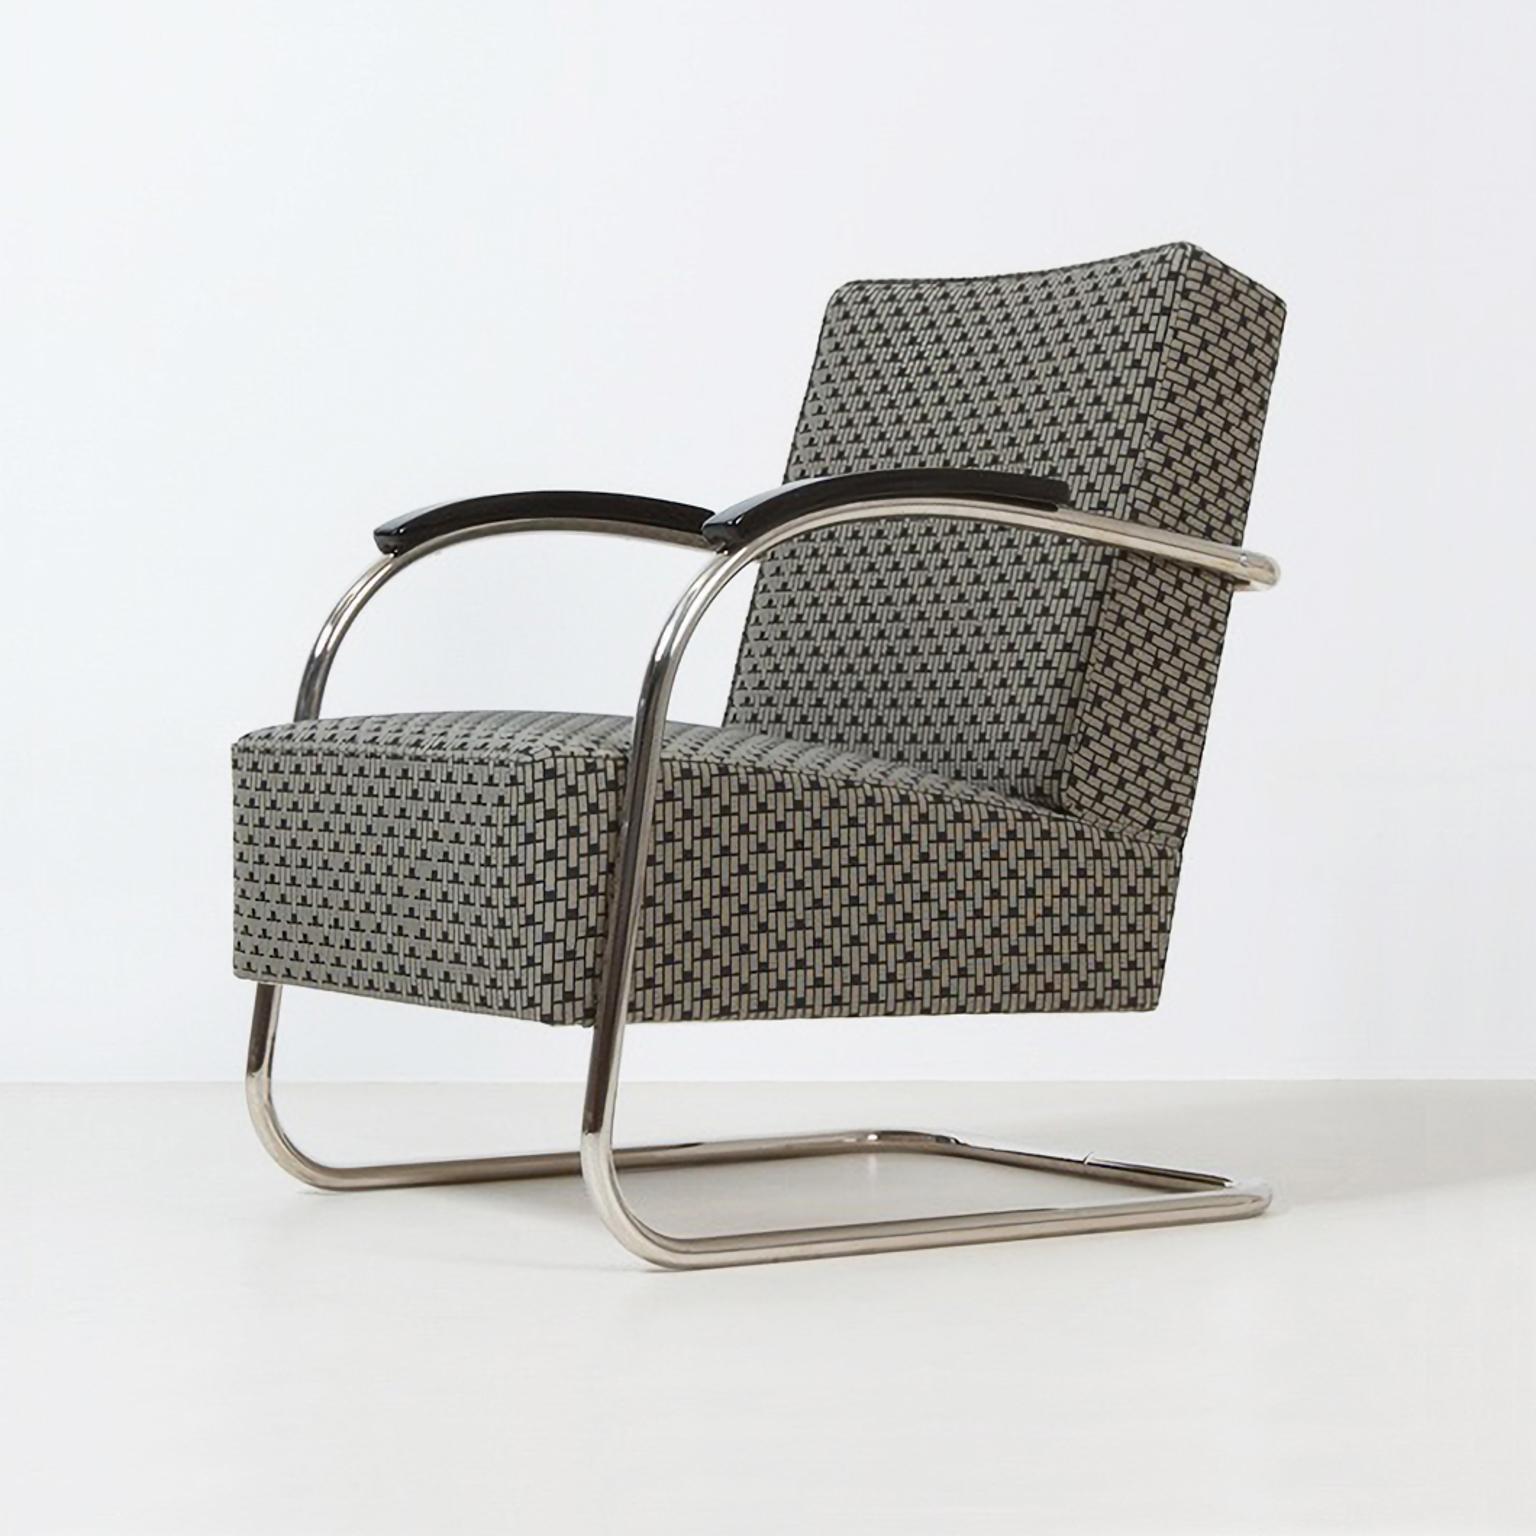 Bespoke Modernist tubular steel cantilever armchair manufactured by Mücke-Melder, c. 1930. Available in fabric or leather upholstery.

This armchairs are restored on request and available in different amounts. 
Delivery time 6-7 weeks.